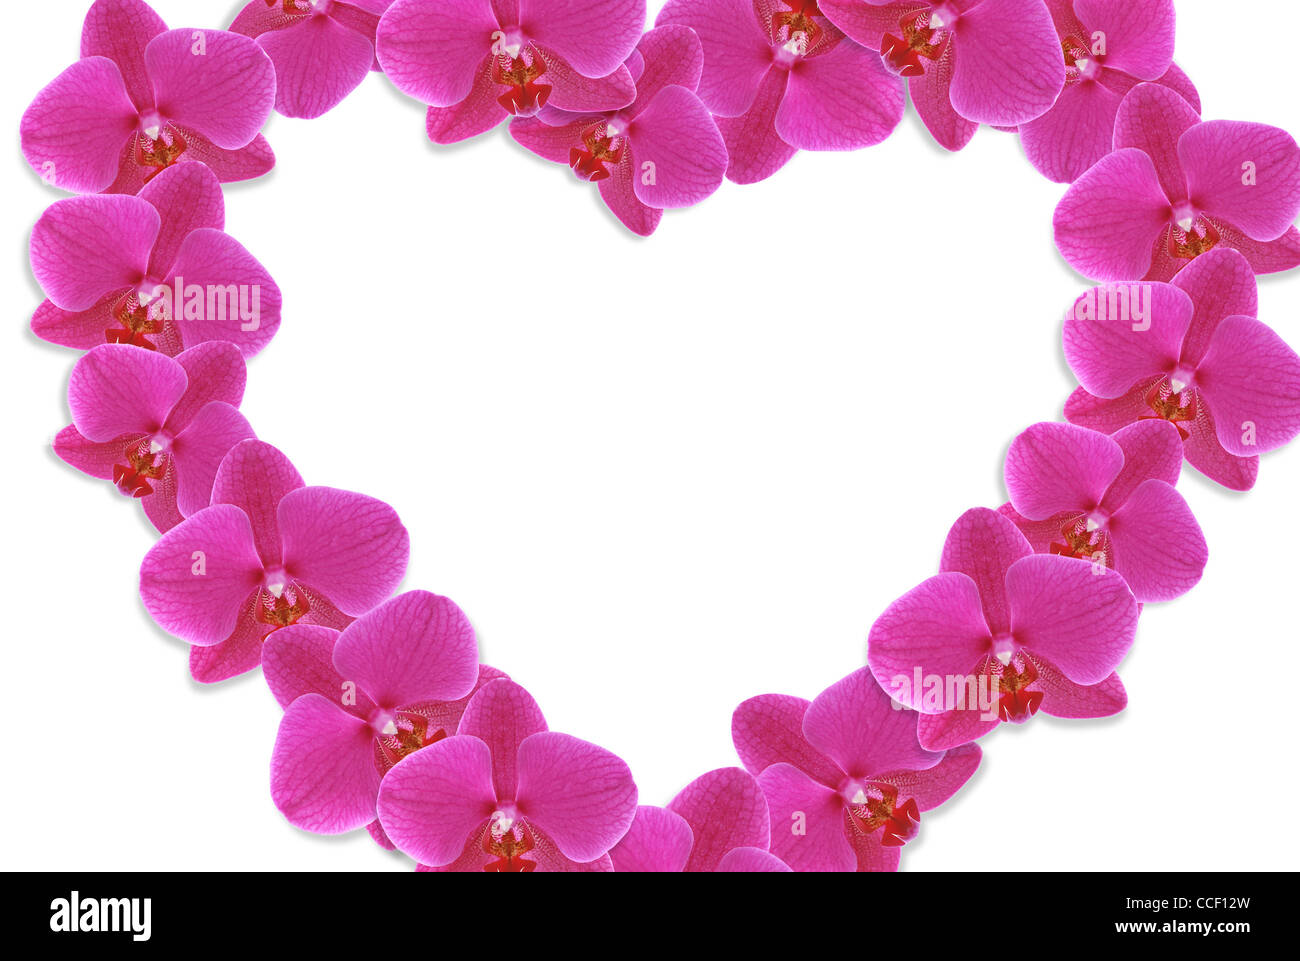 Heart made of flowers on white background Stock Photo